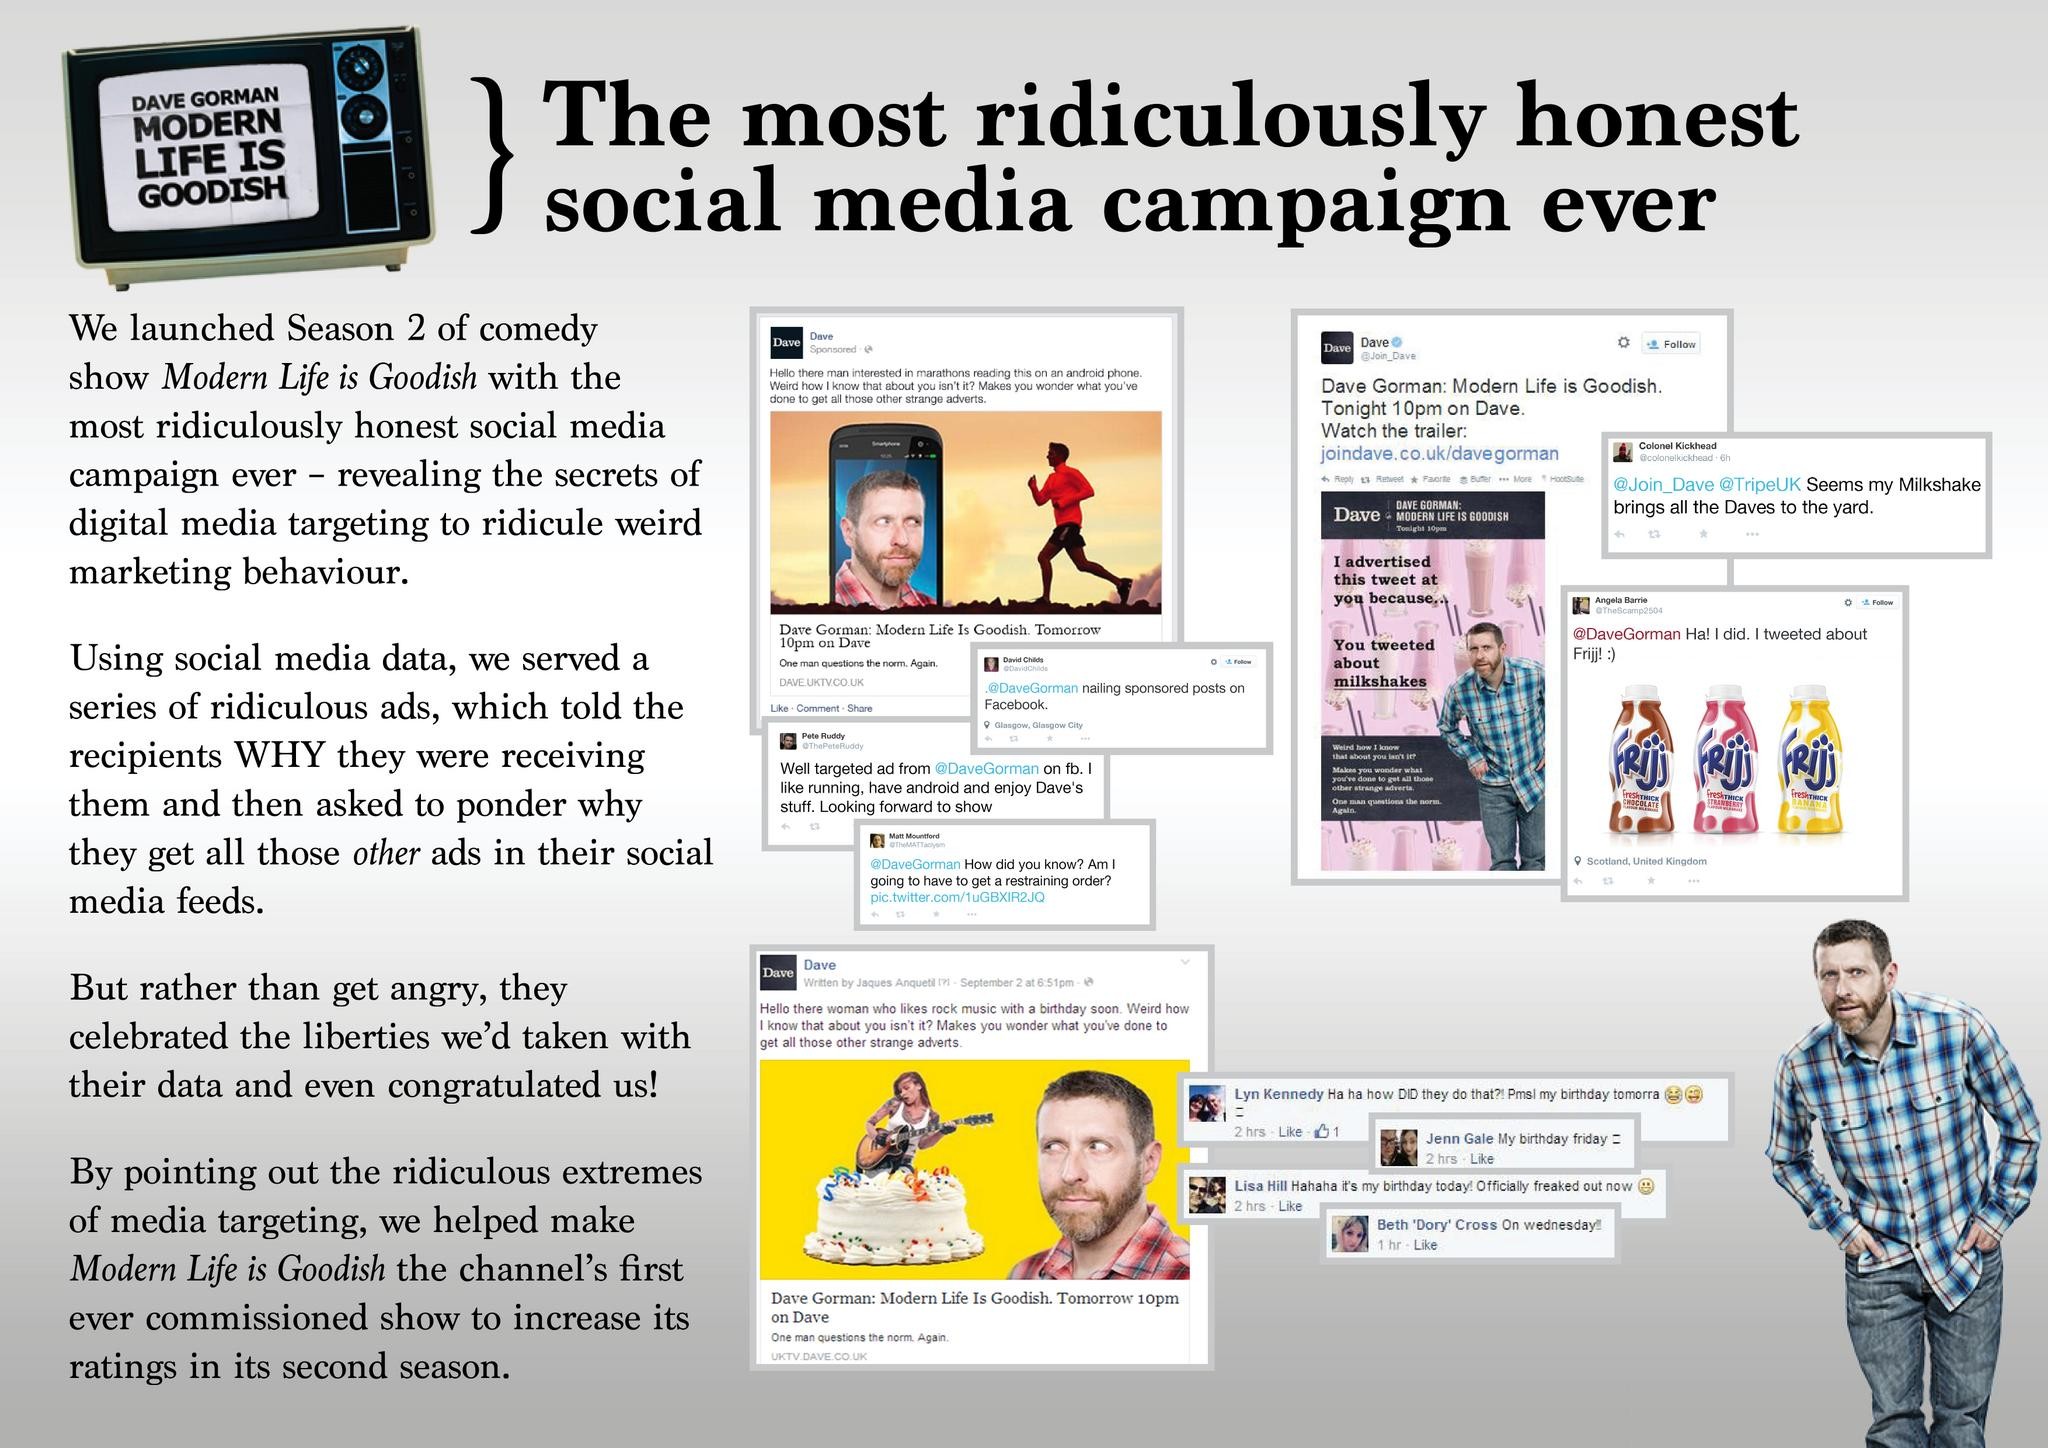 THE MOST RIDICULOUSLY HONEST SOCIAL MEDIA CAMPAIGN EVER